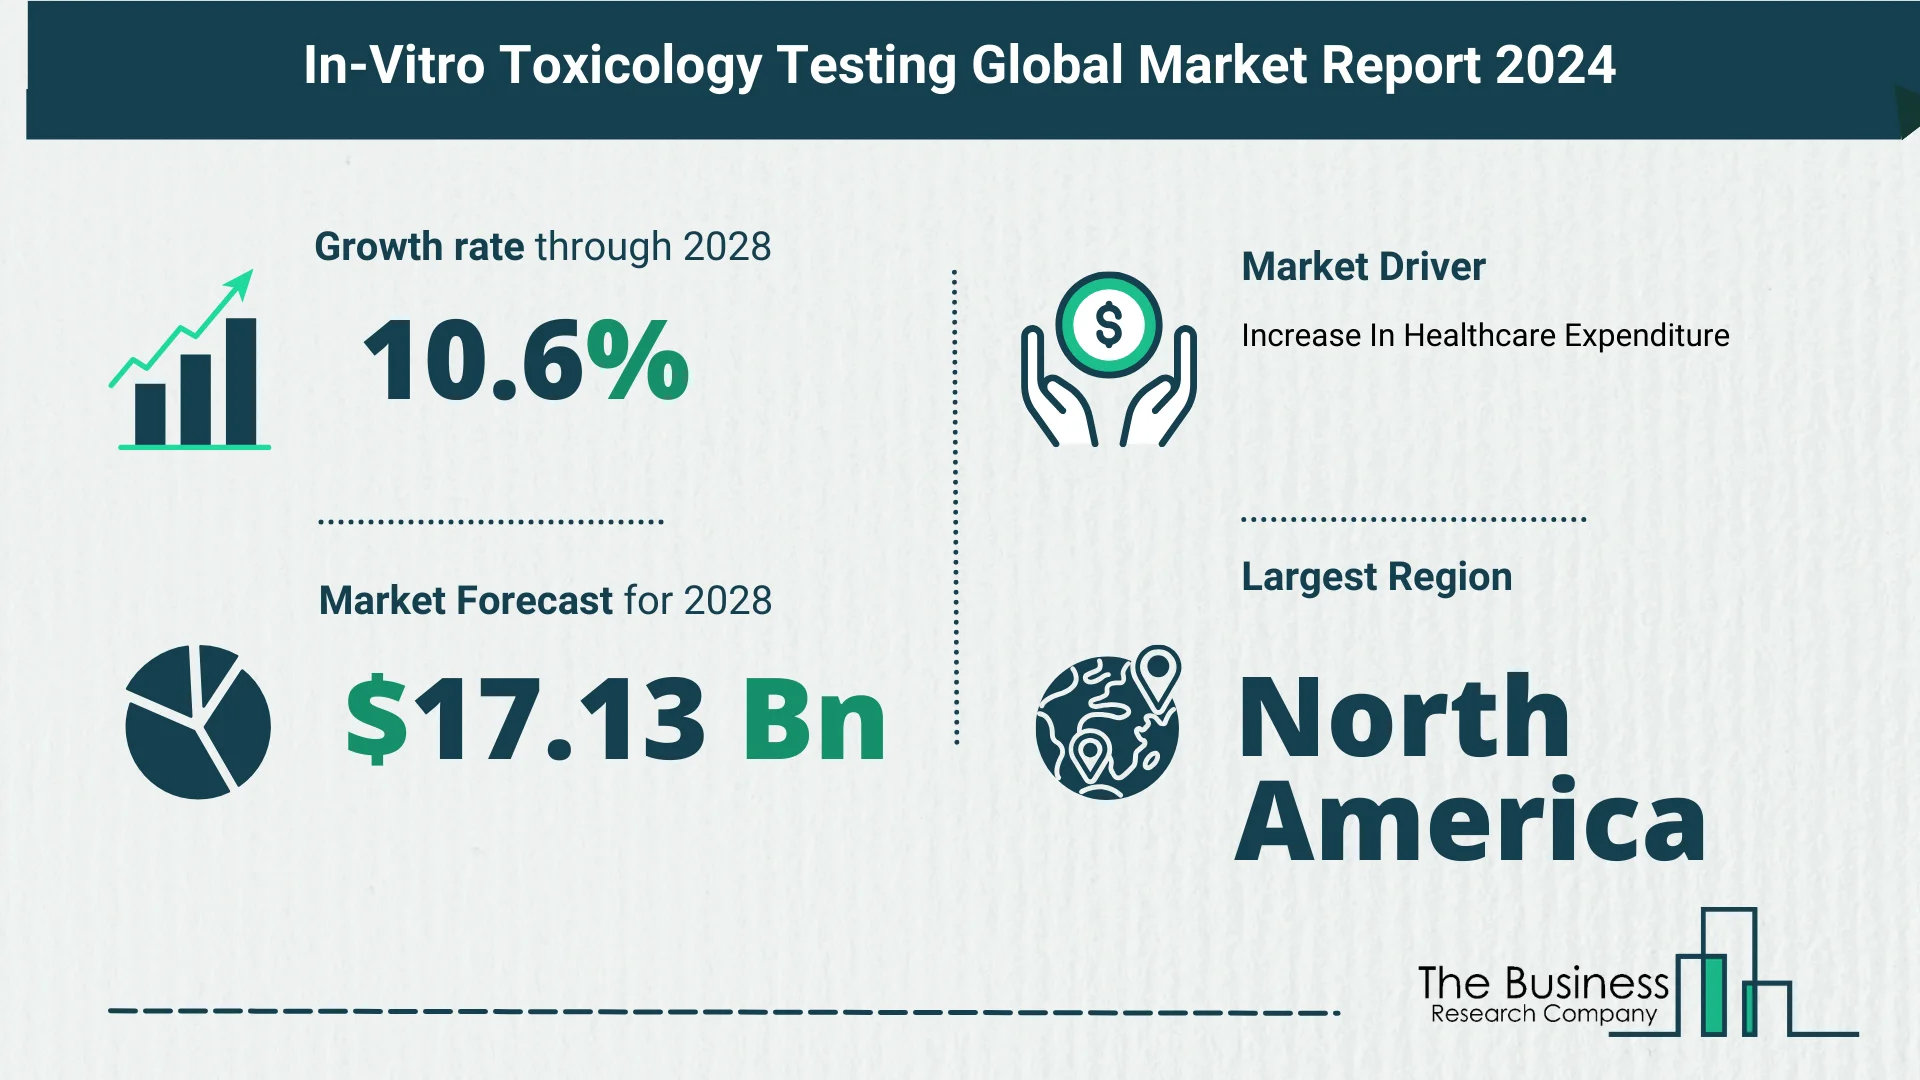 Global In-Vitro Toxicology Testing Market Overview 2024: Size, Drivers, And Trends